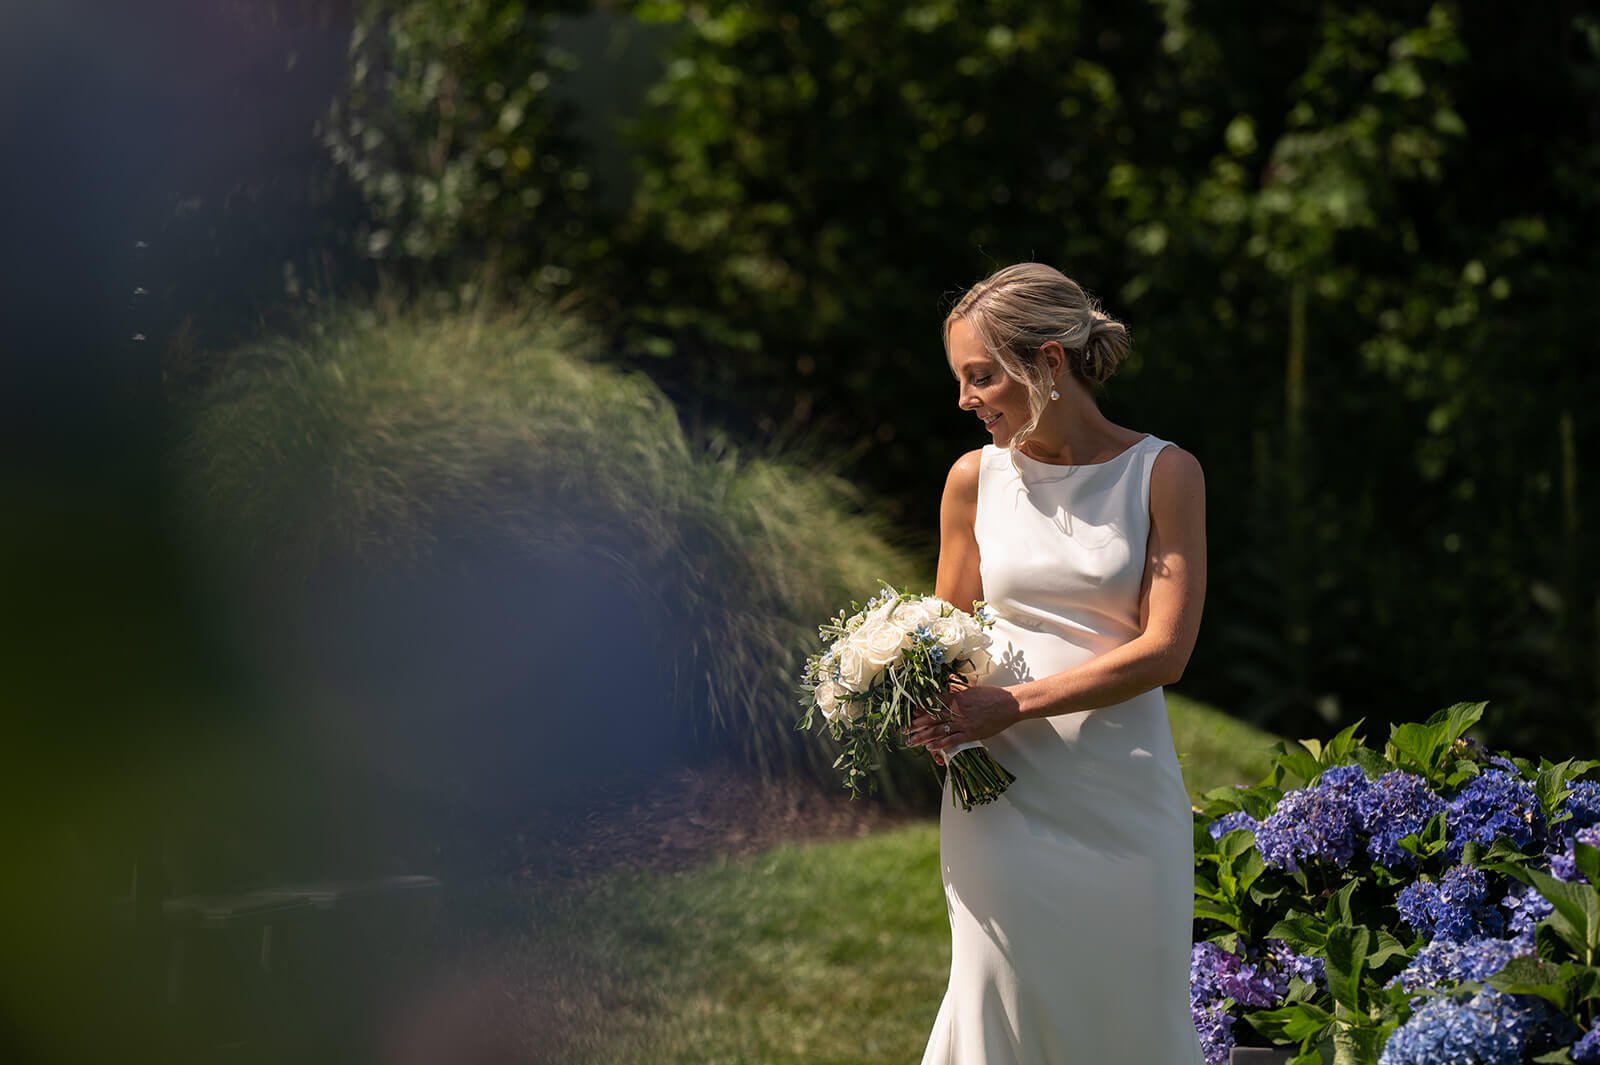 Bride in a classic gown by Theia